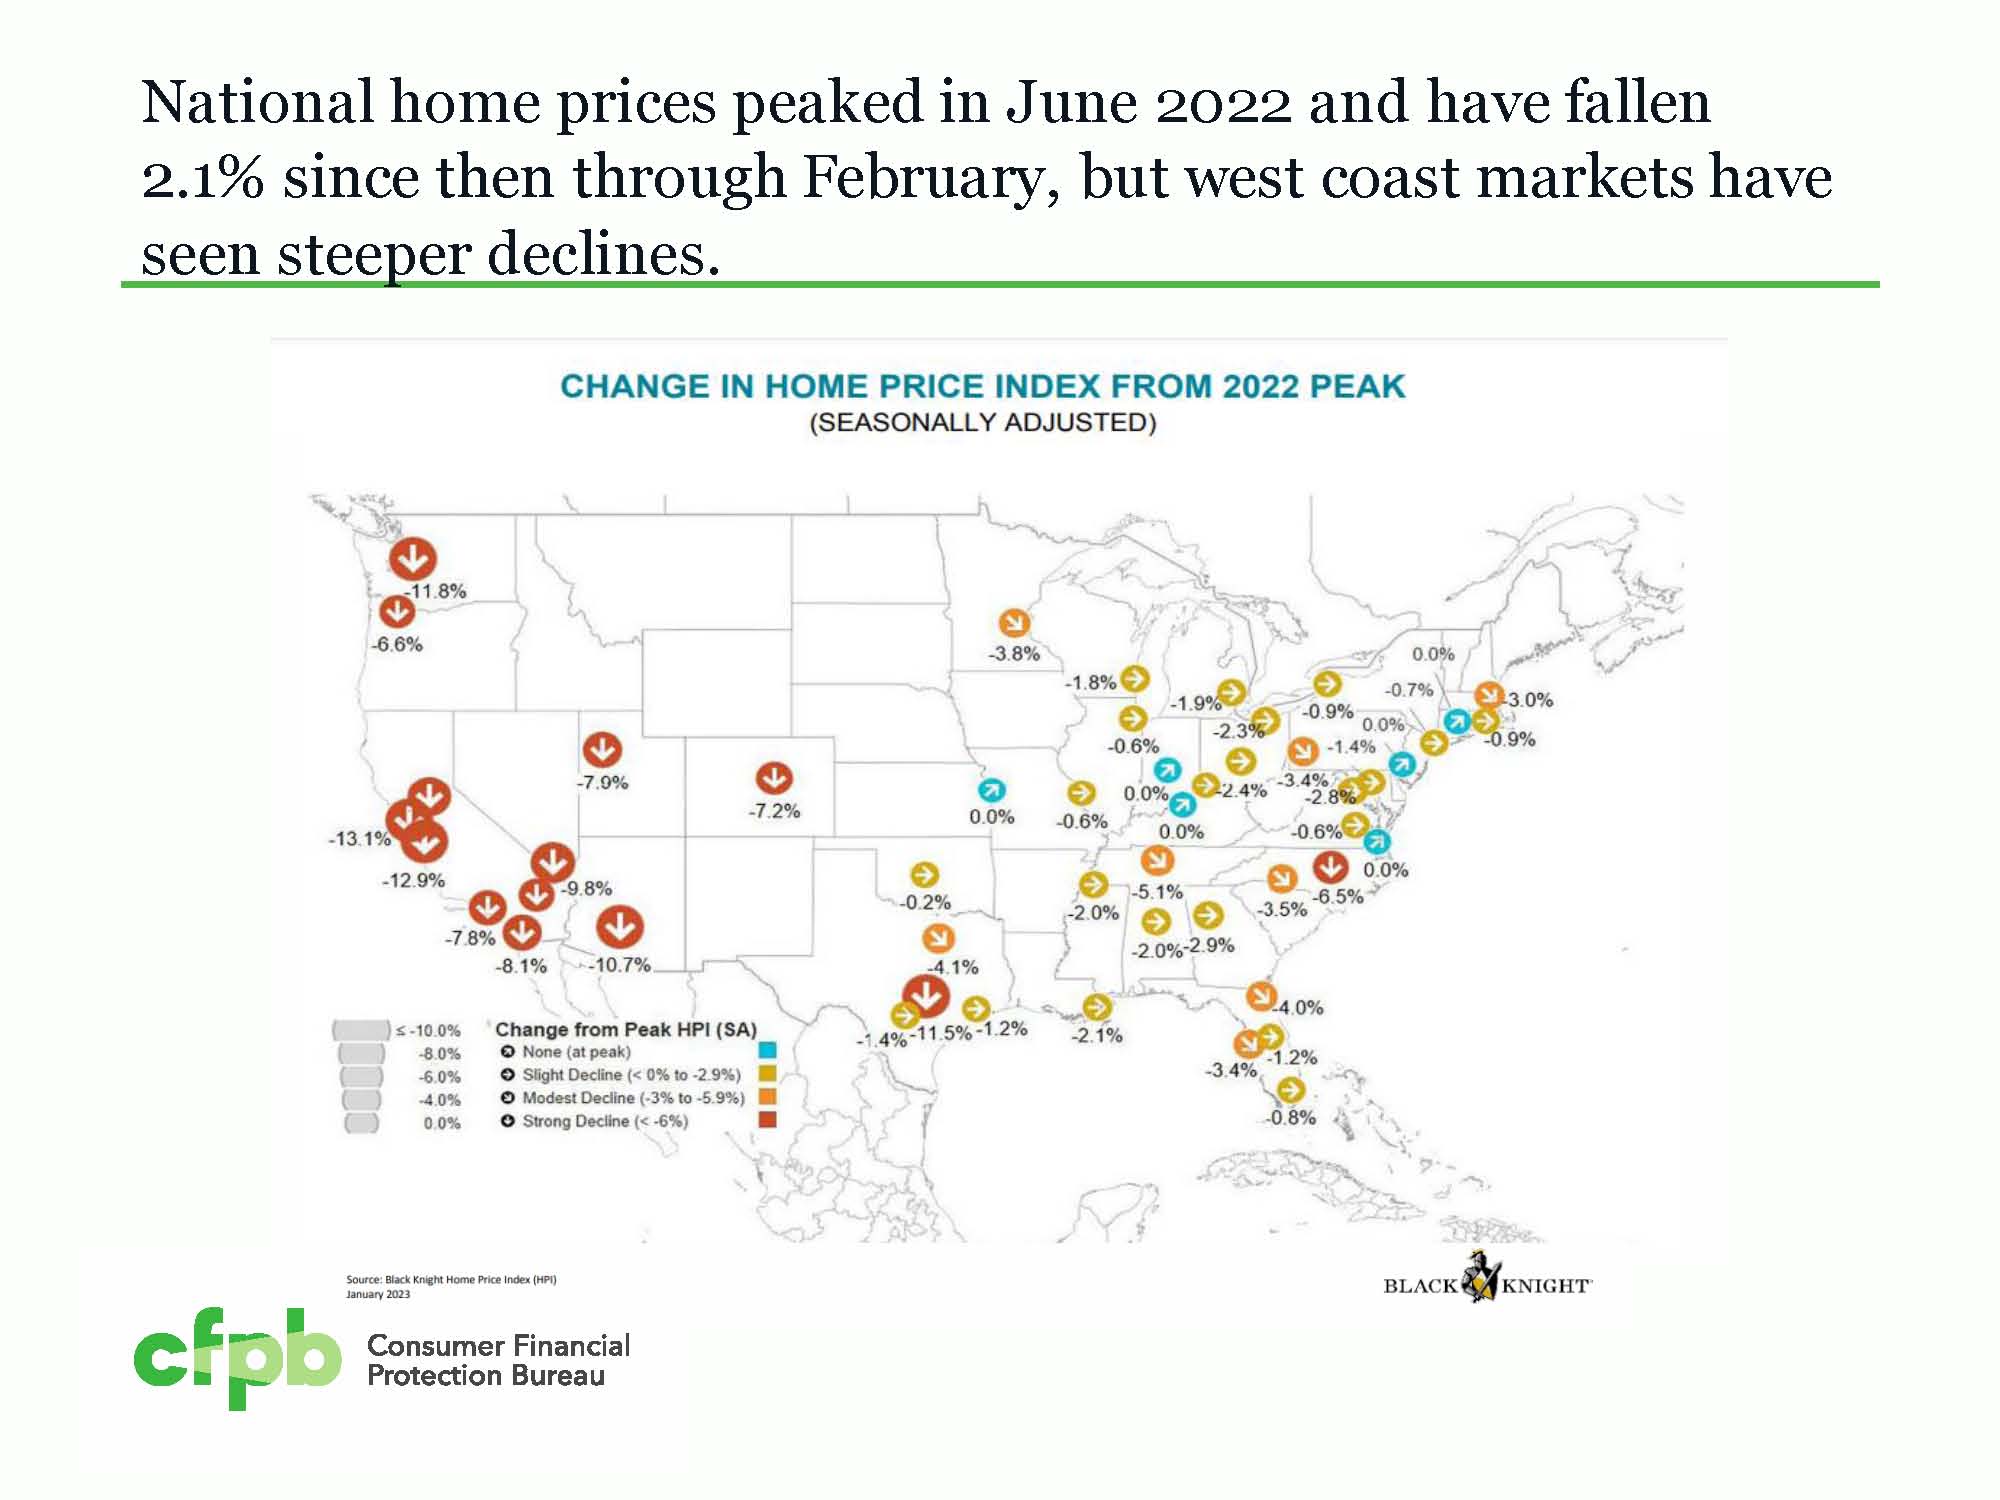 National home price changes in past year by market